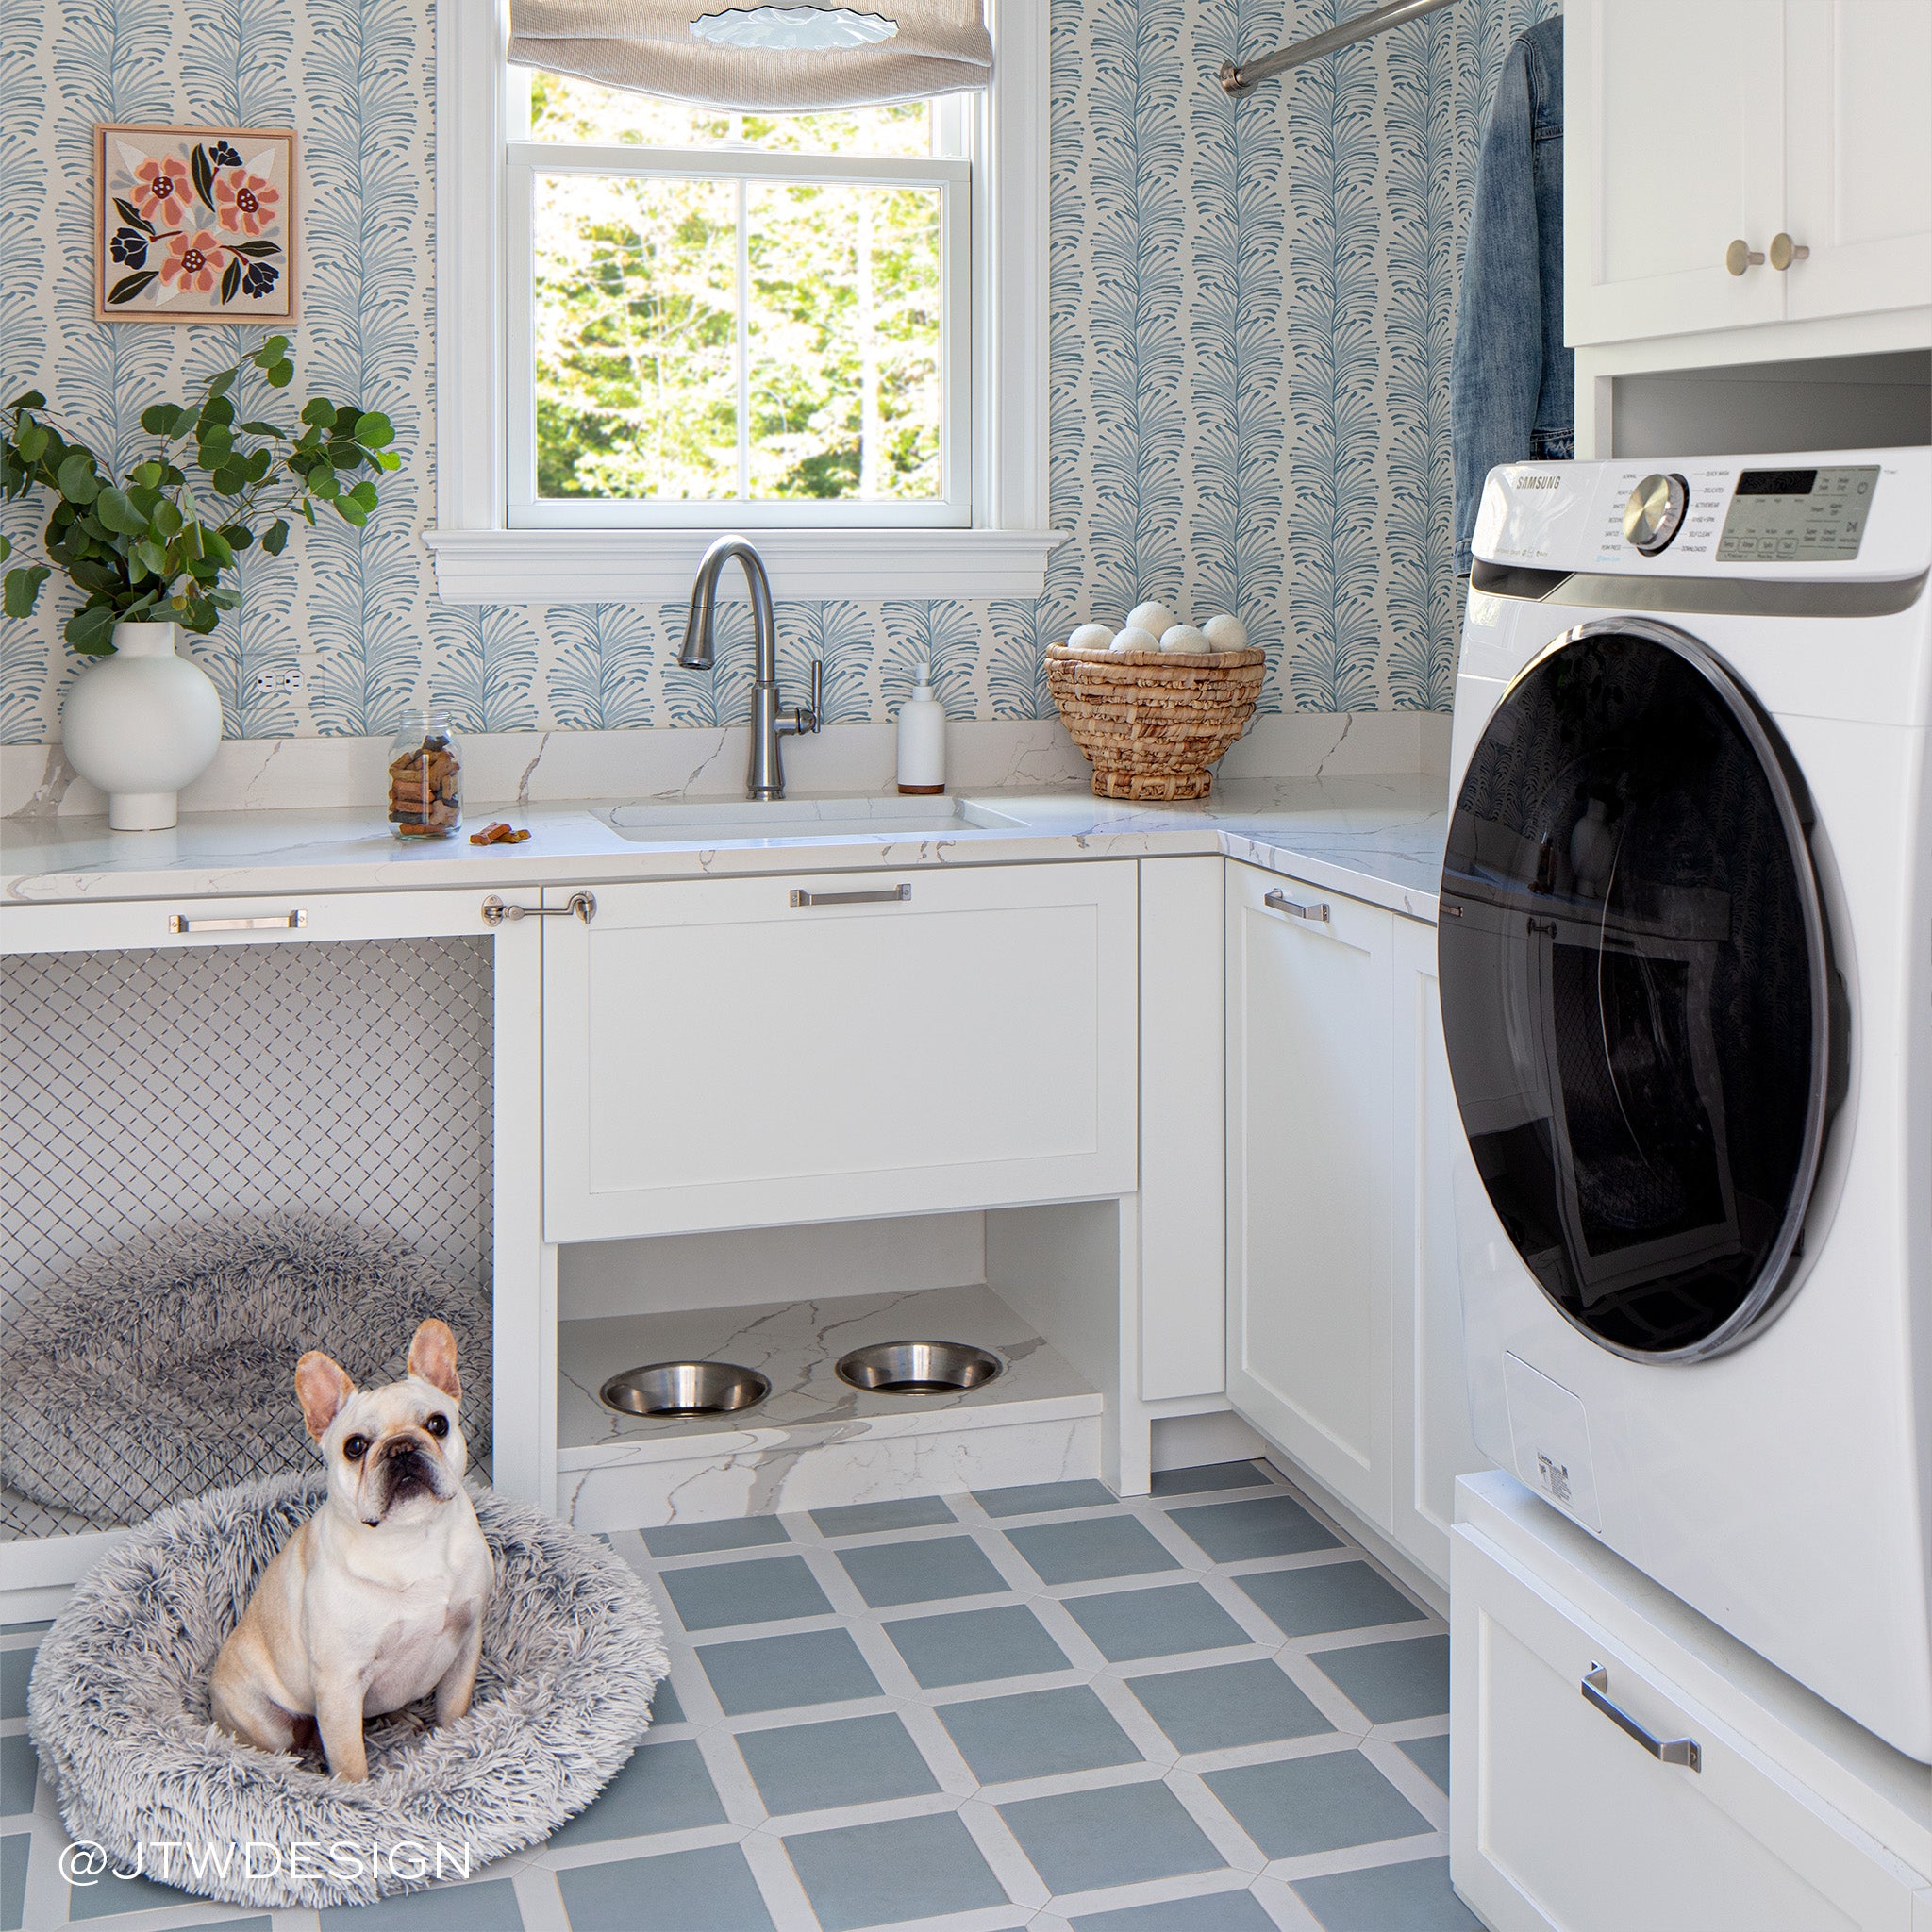 Laundry room styled with Sky Blue Botanical Stripe Printed Wallpaper and white countertop with dog in grey bed on the floor to the left. Photo taken by JTW Design